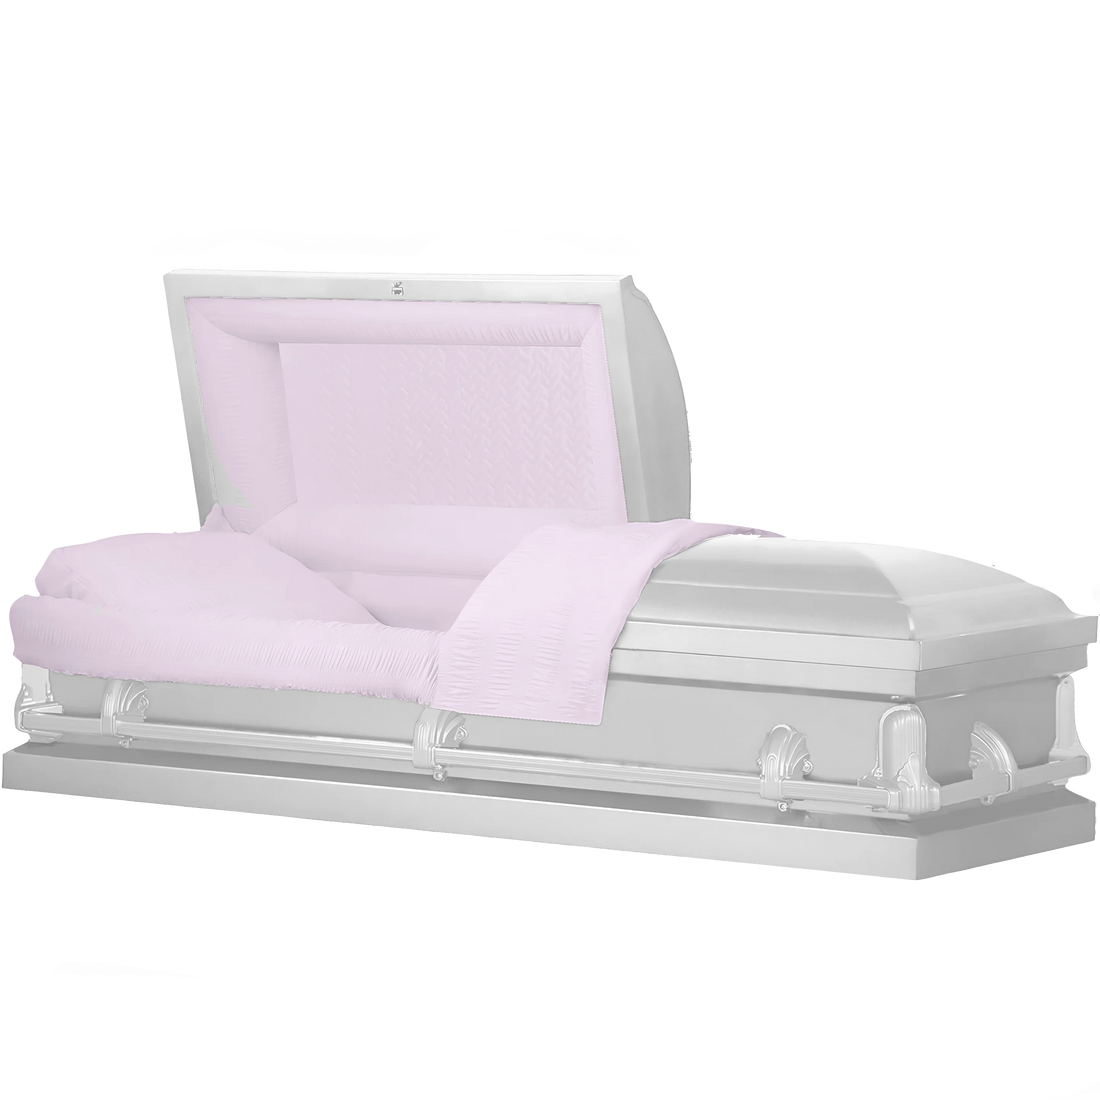 Buying A Casket On Amazon